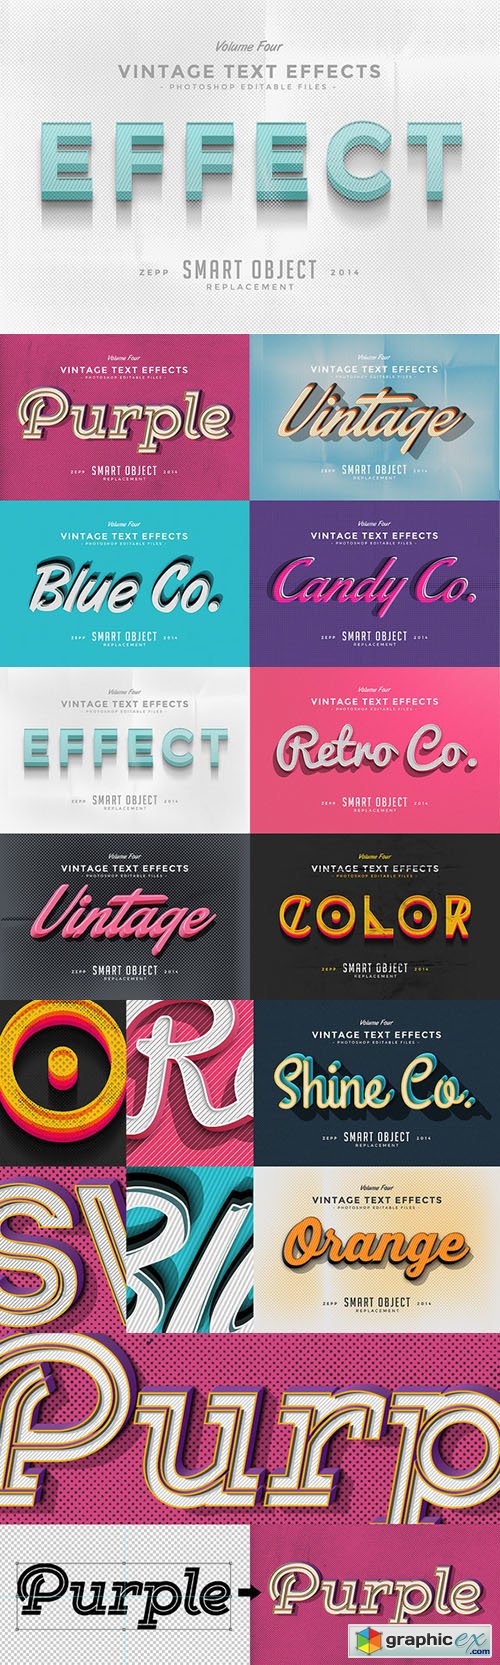 Vintage Text Effects Vol.4